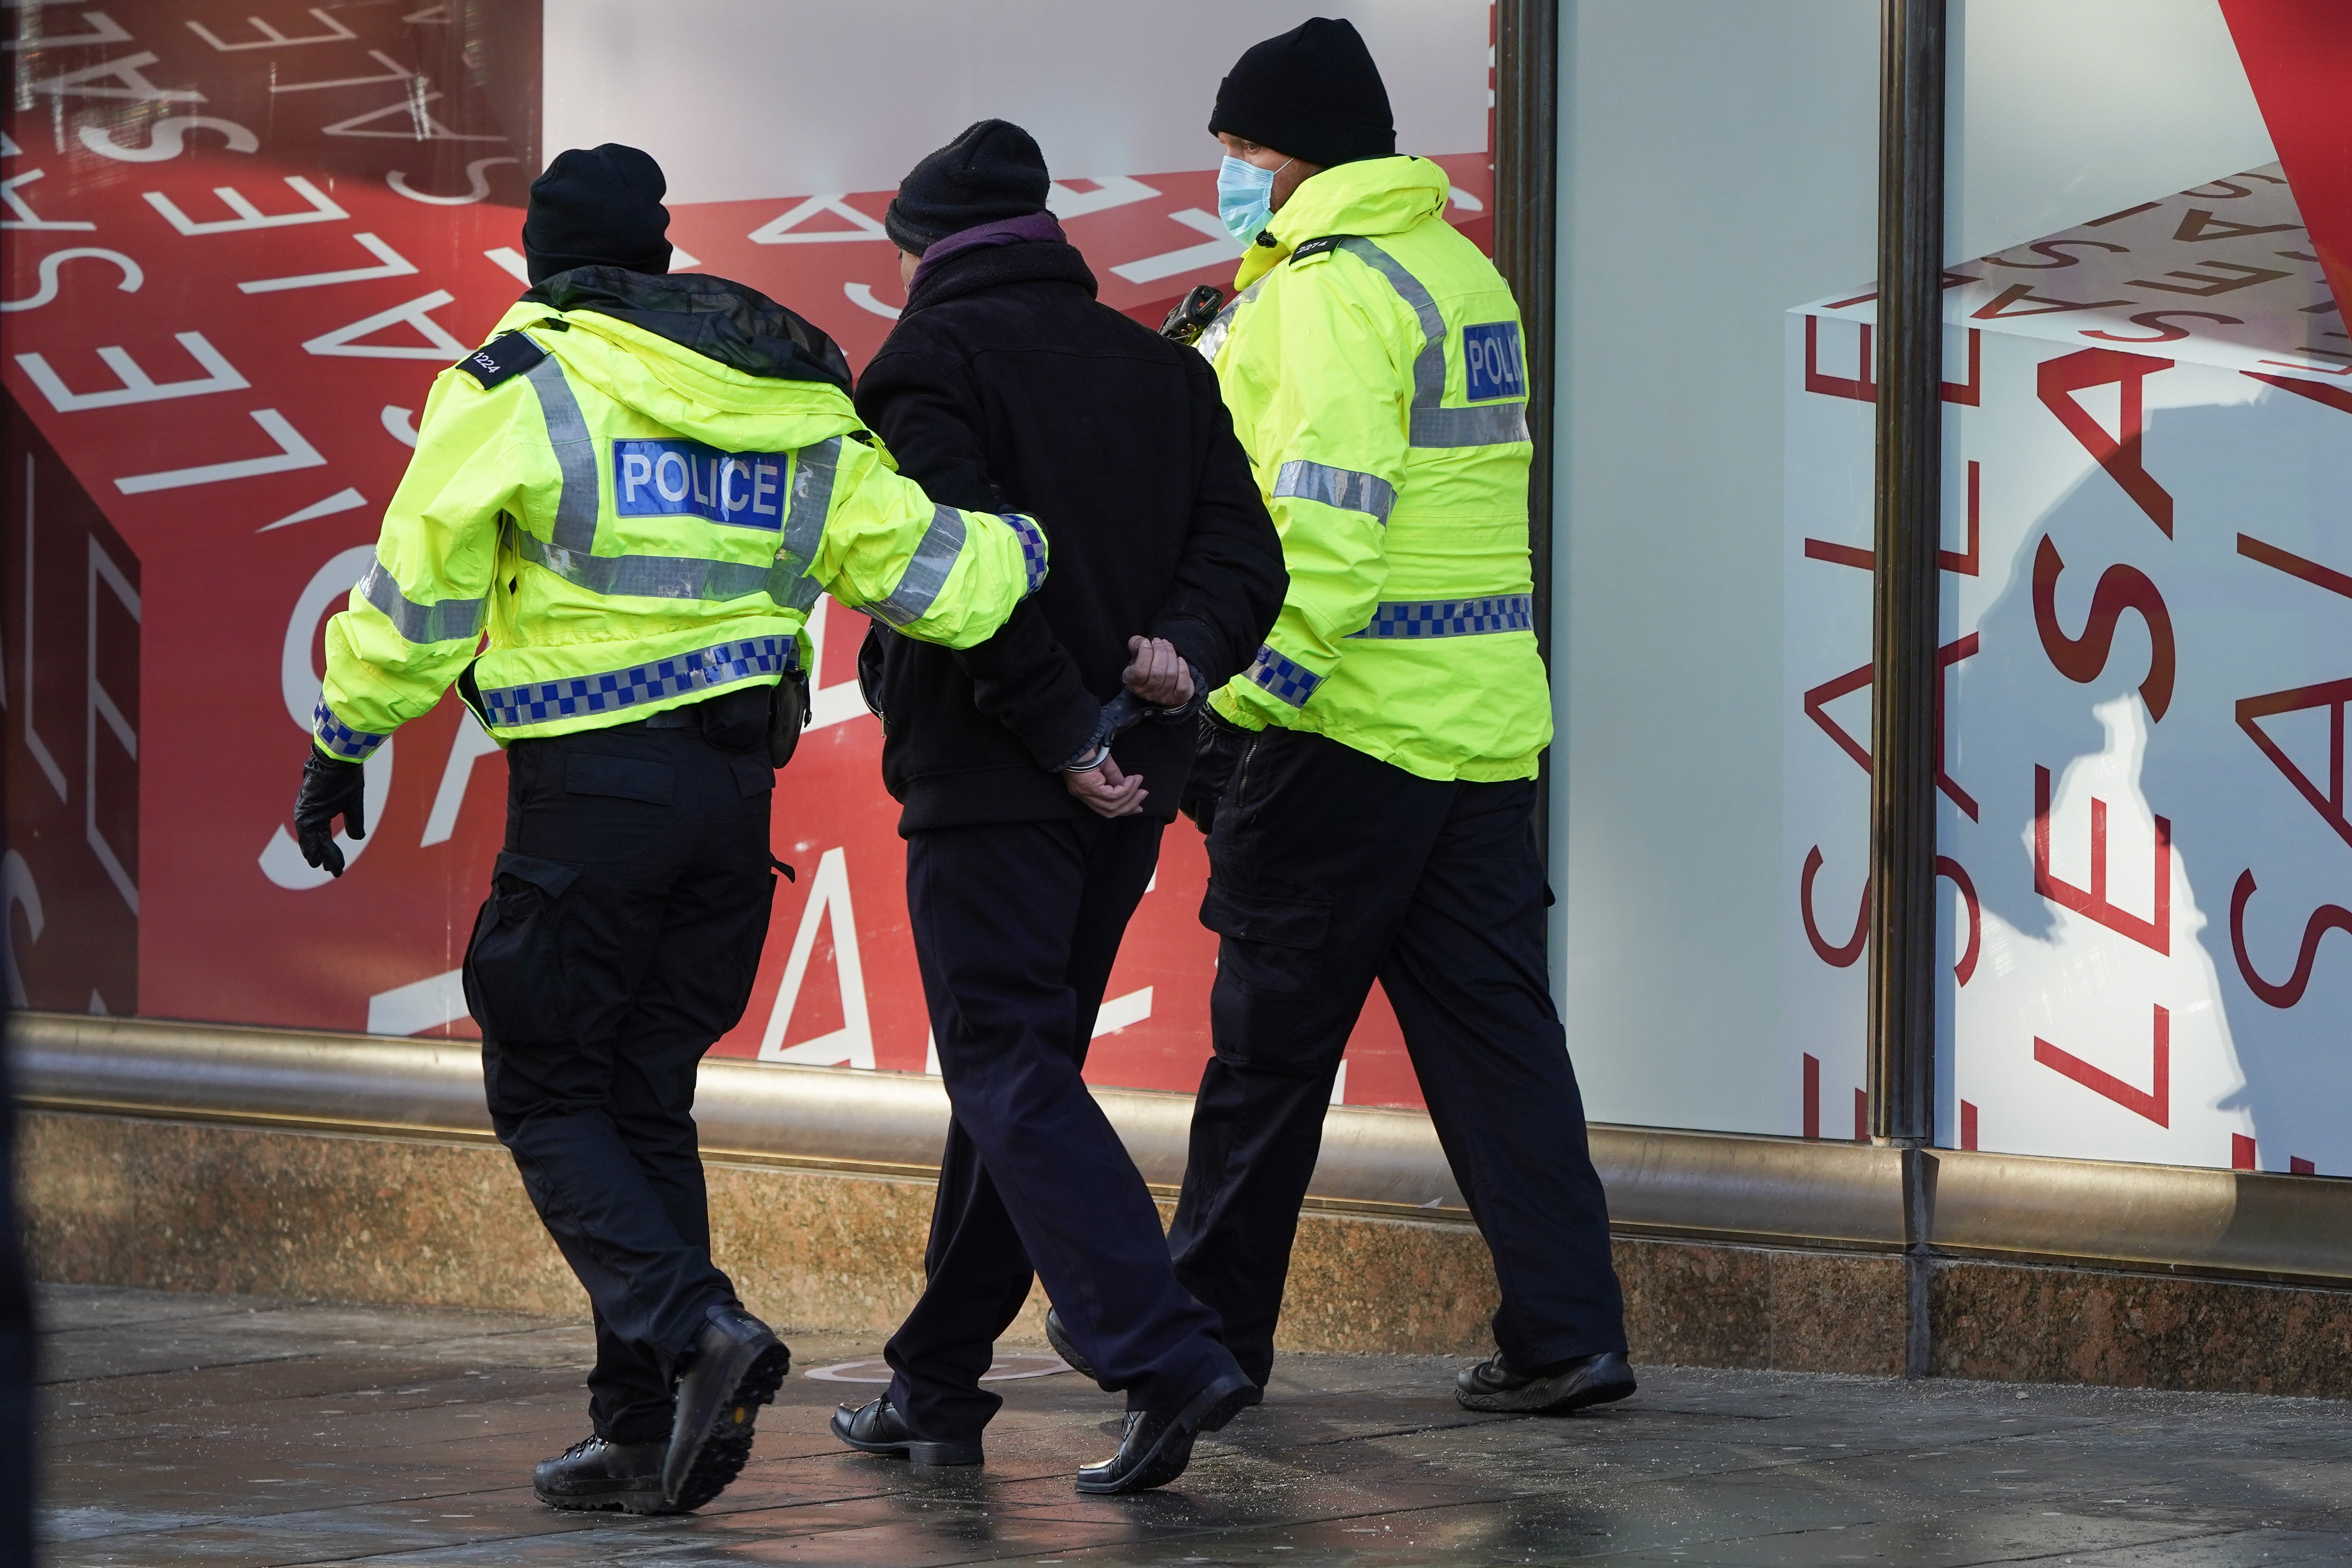 An anti-lockdown protester is detained in Newcastle city centre. Priti Patel has praised the ‘selflessness’ of officers policing through the pandemic